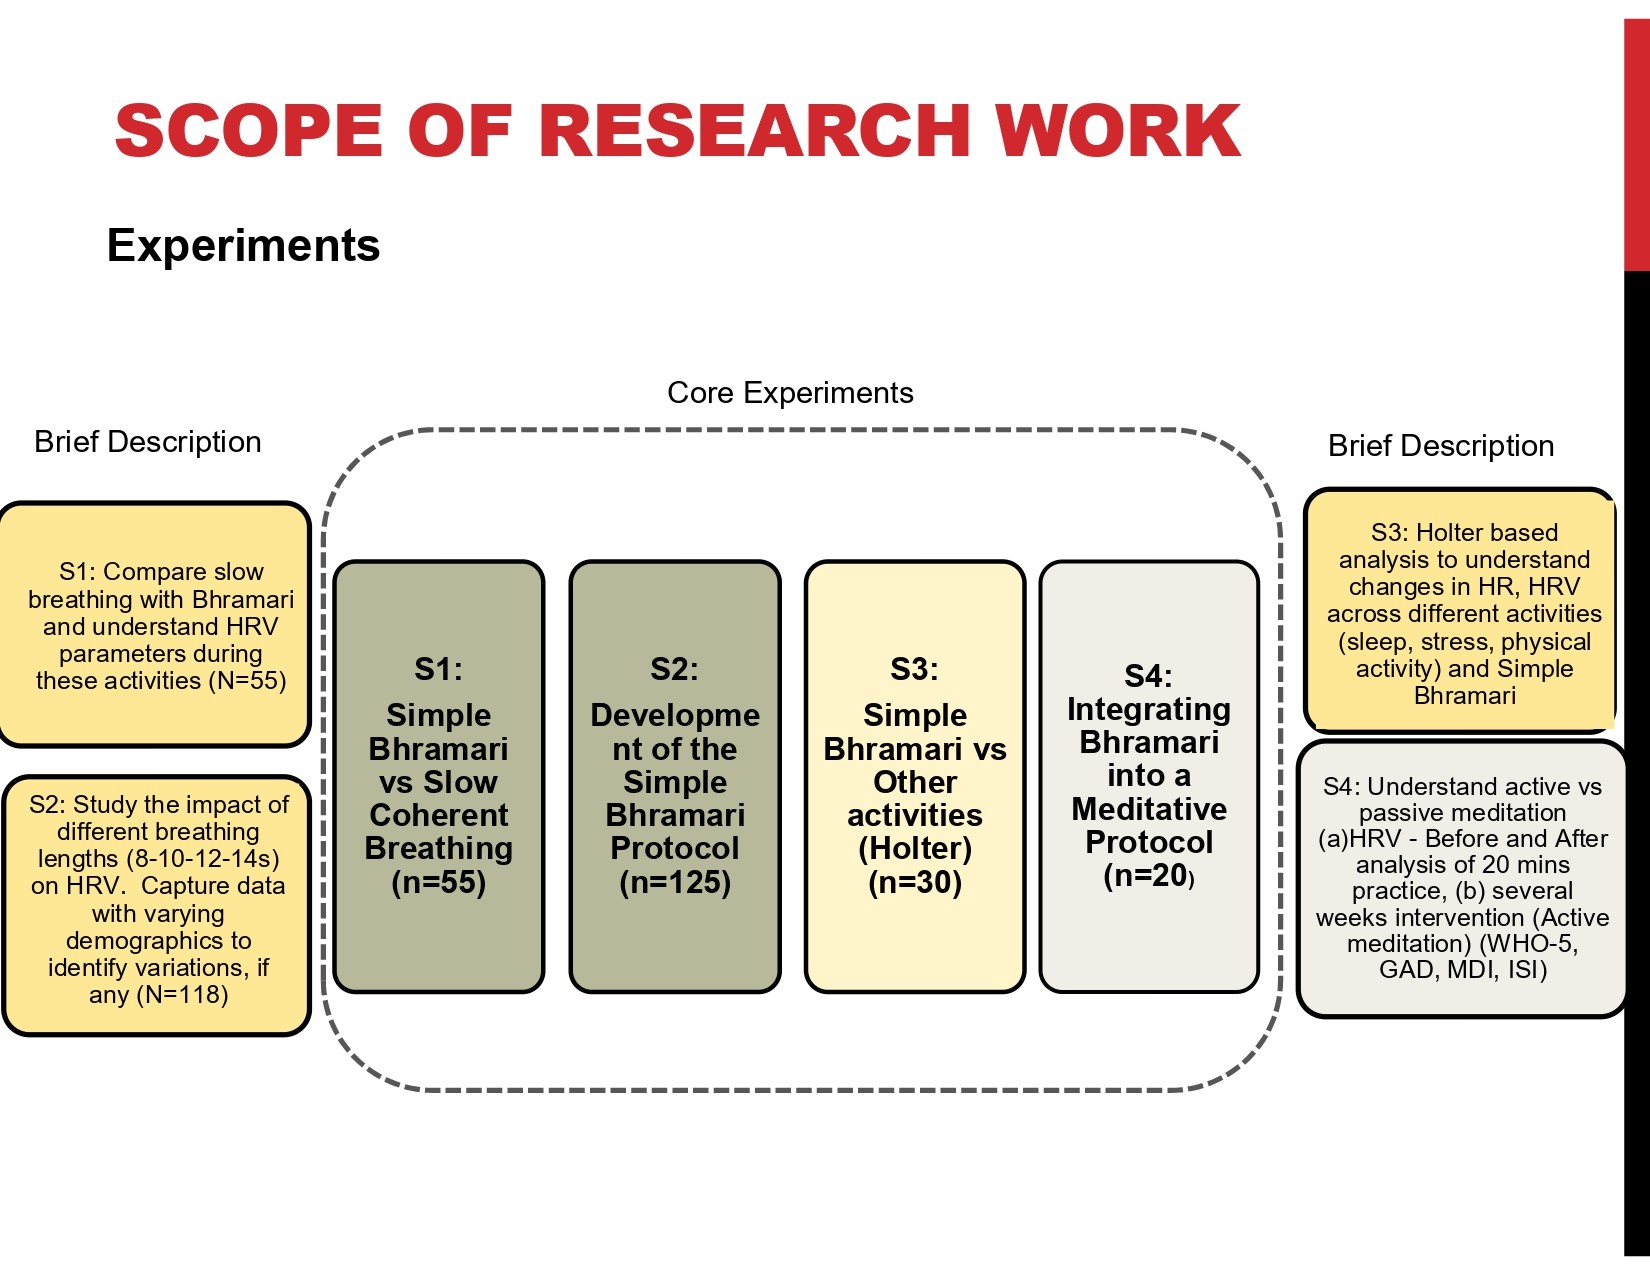 Scope of experimental research work